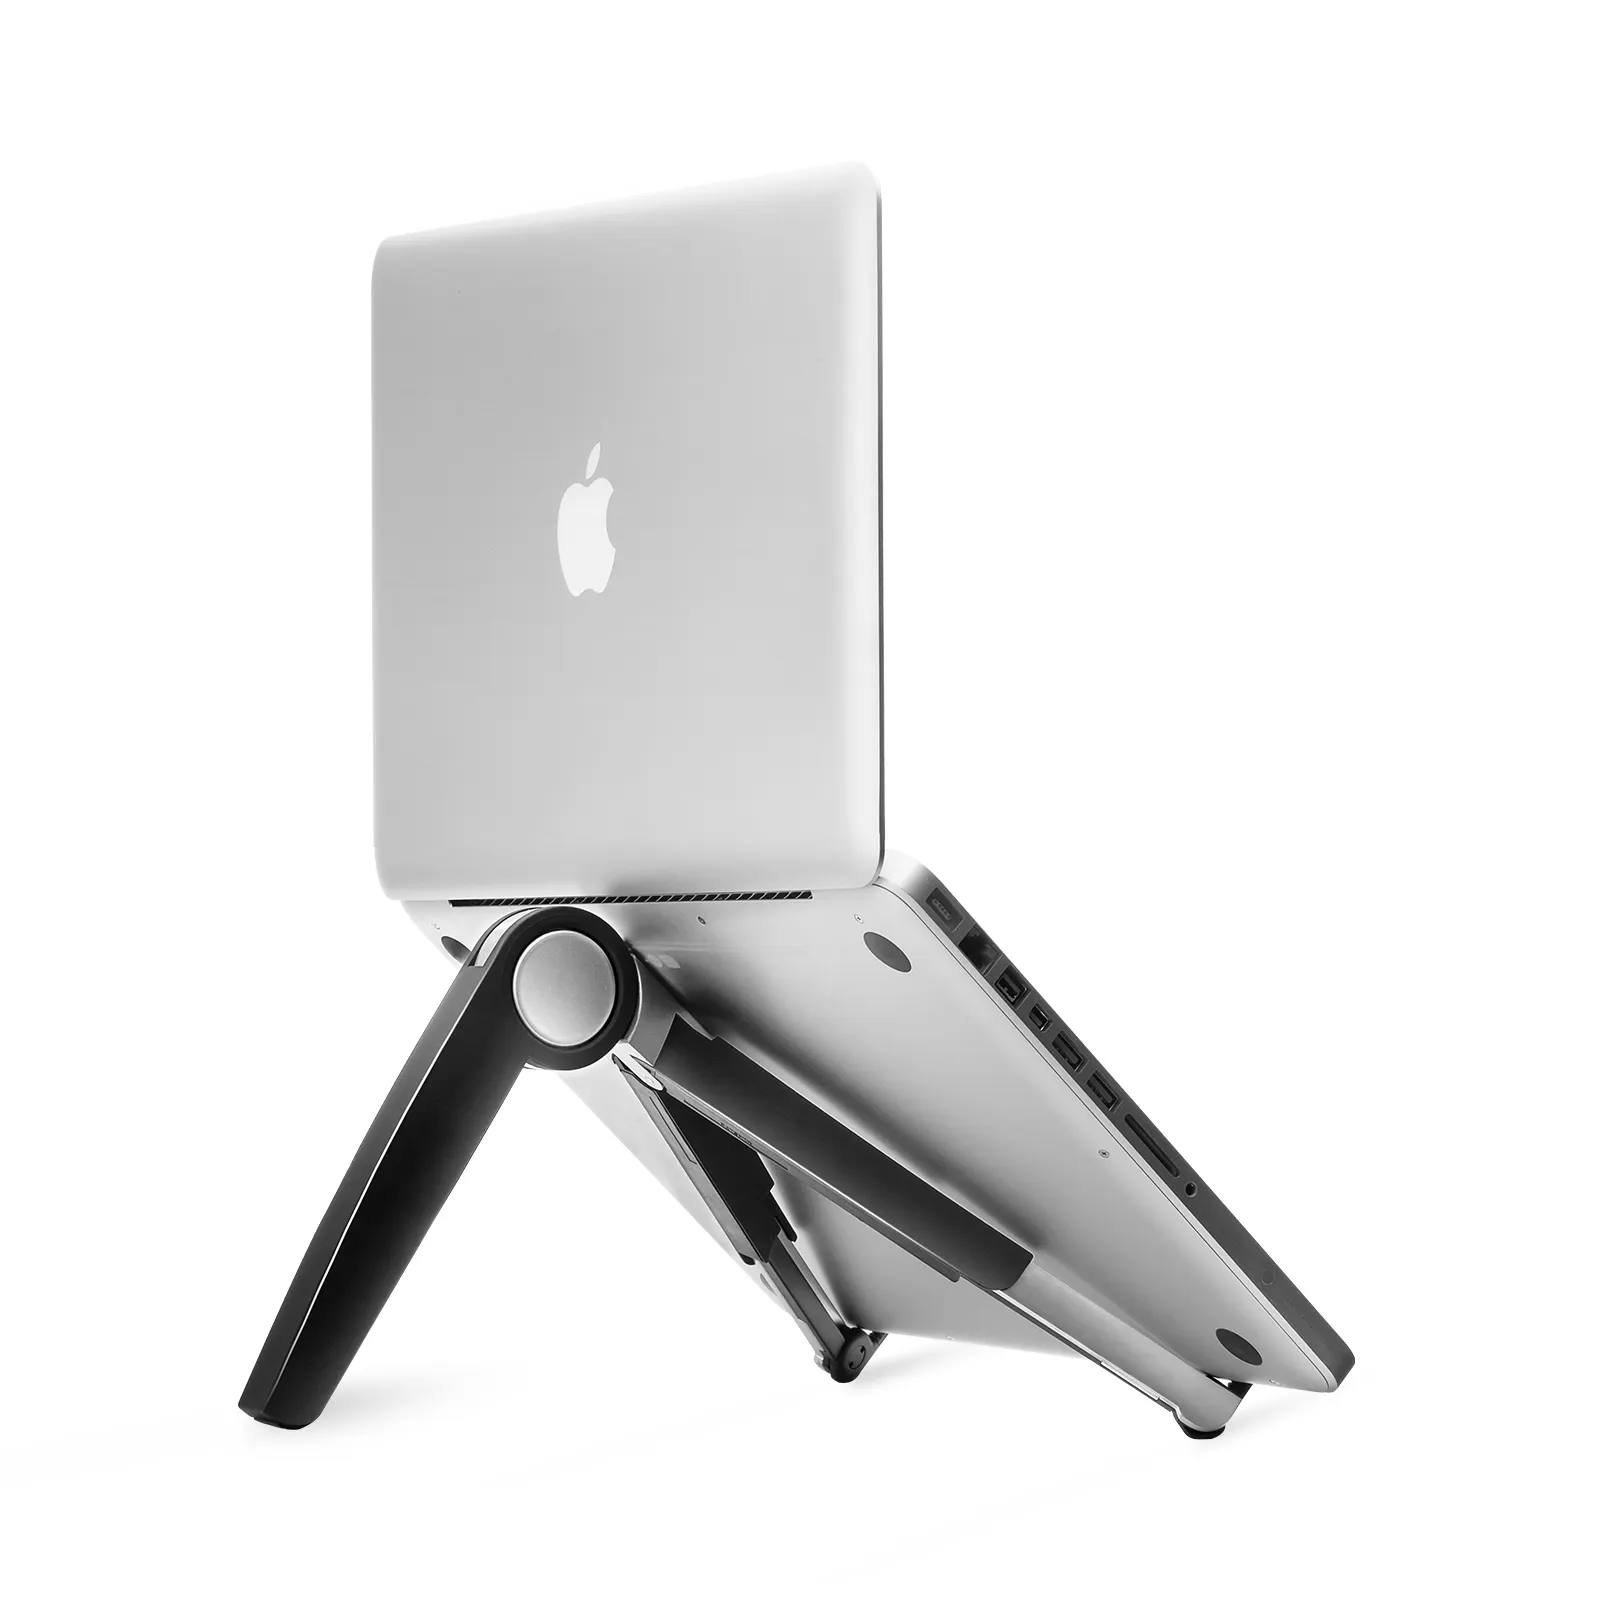 UPERGO Aluminum Adjustable Laptop Stand and Cooling support holder portable laptop stand